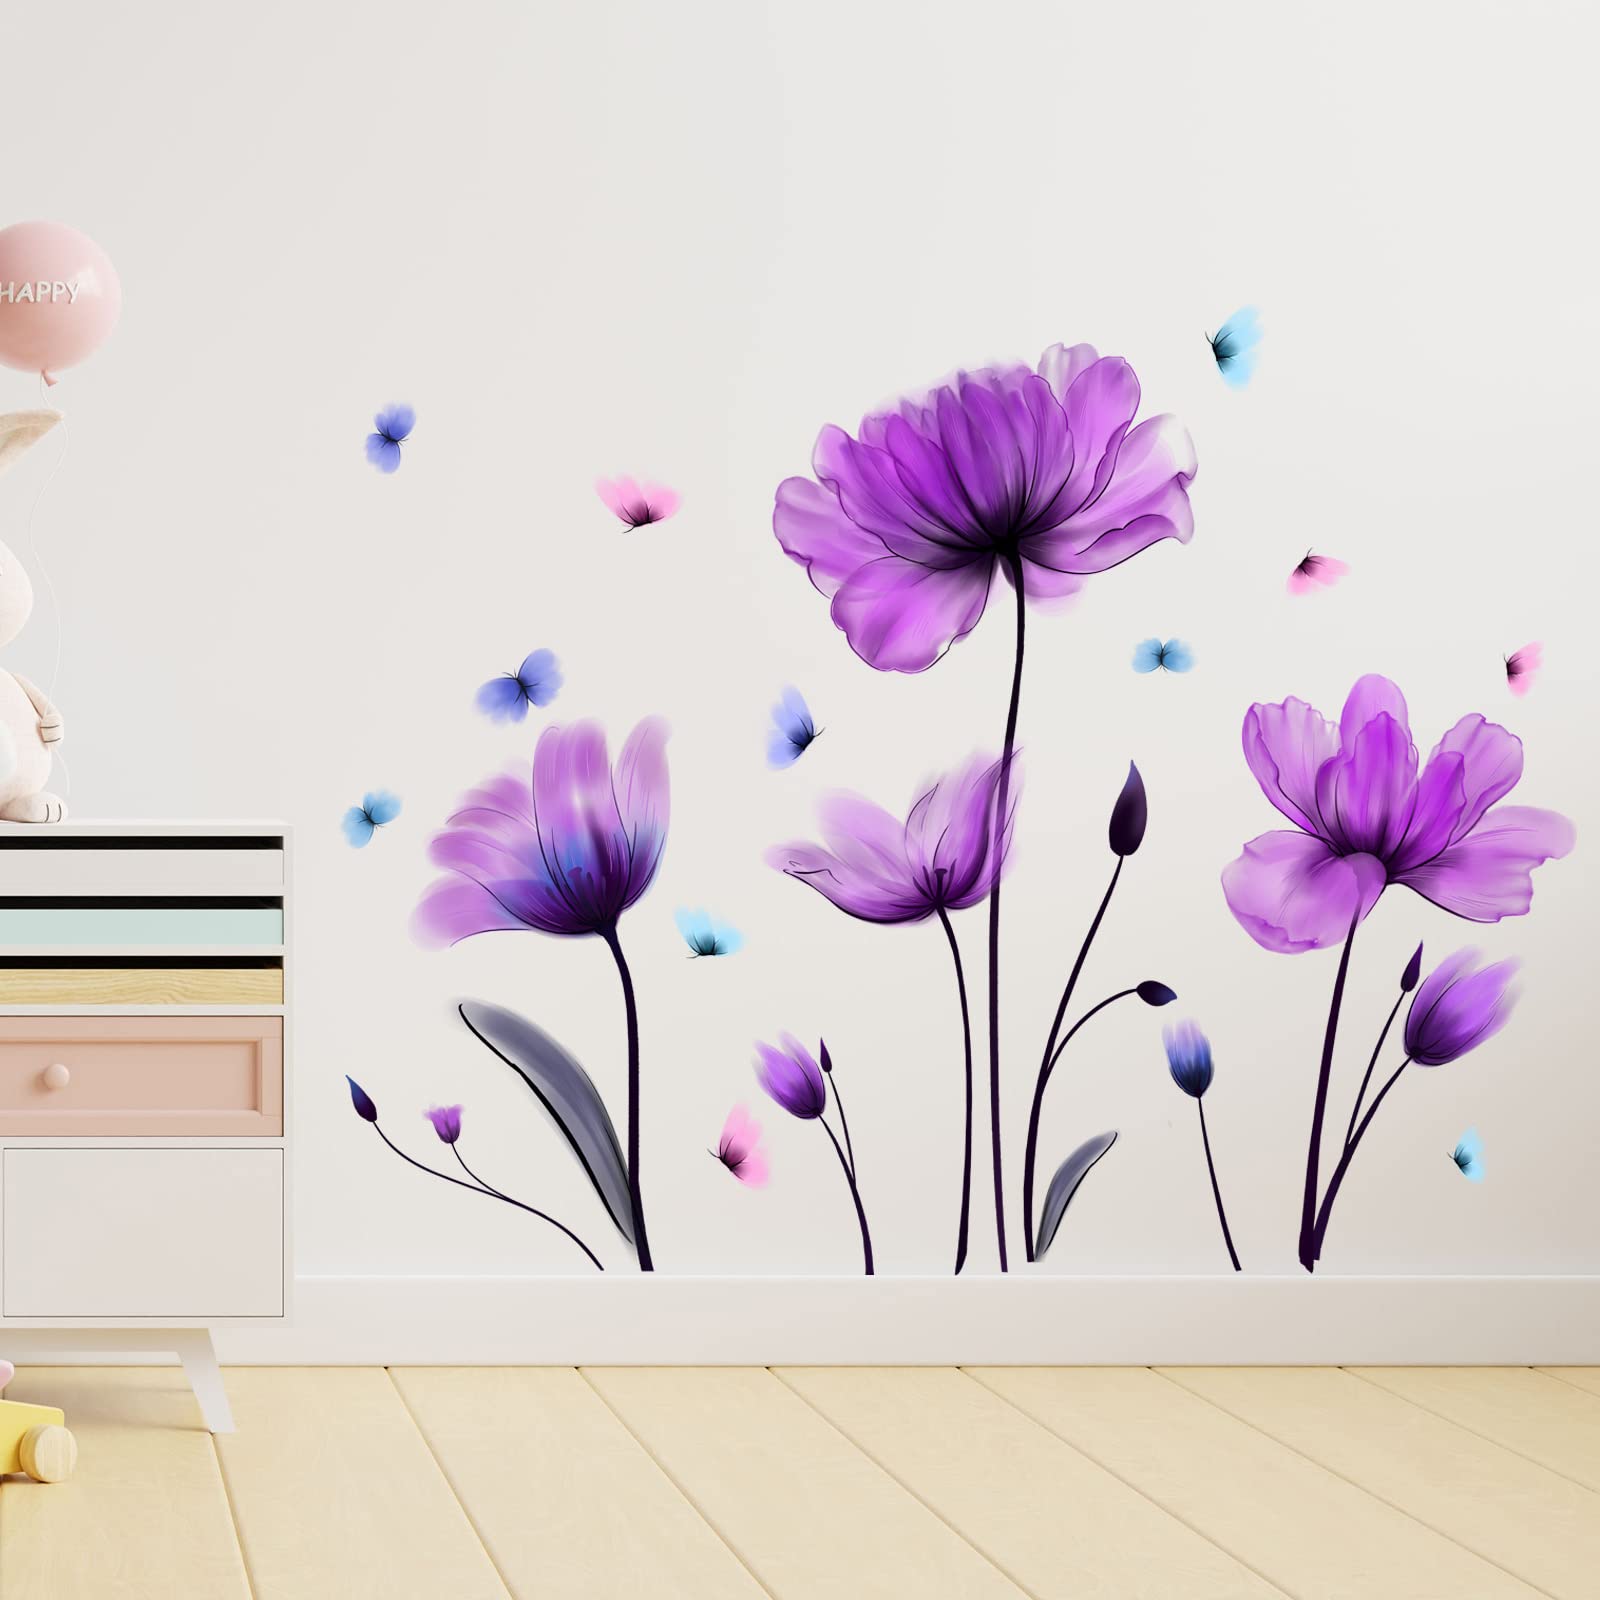 Flowers Wall Sticker Purple Floral Wall Decal Removable Butterfly Wall Stickers Self Adhesive Wall Mural for Nursery Bedroom Kids Room